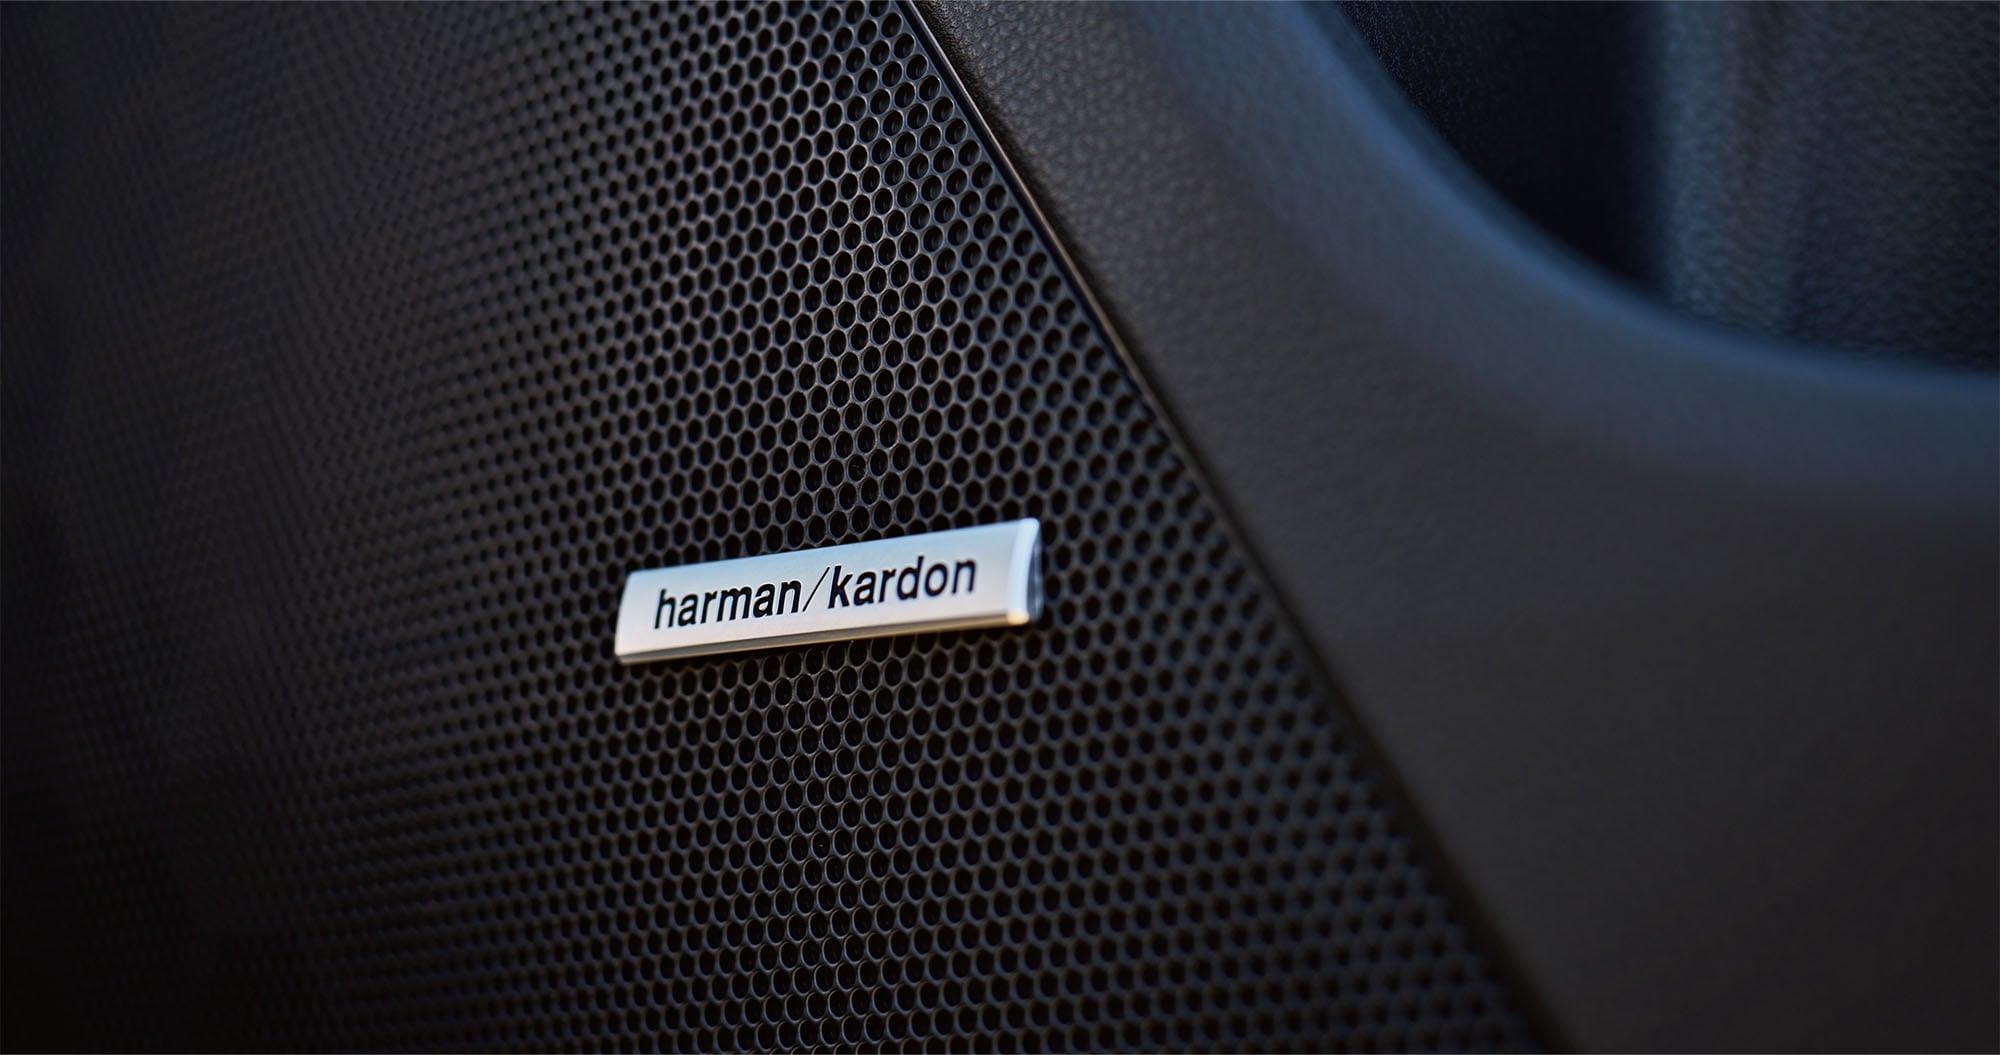  A close-up of one of the speakers of the Harman Kardon premium audio system available on the 2023 Crosstrek.